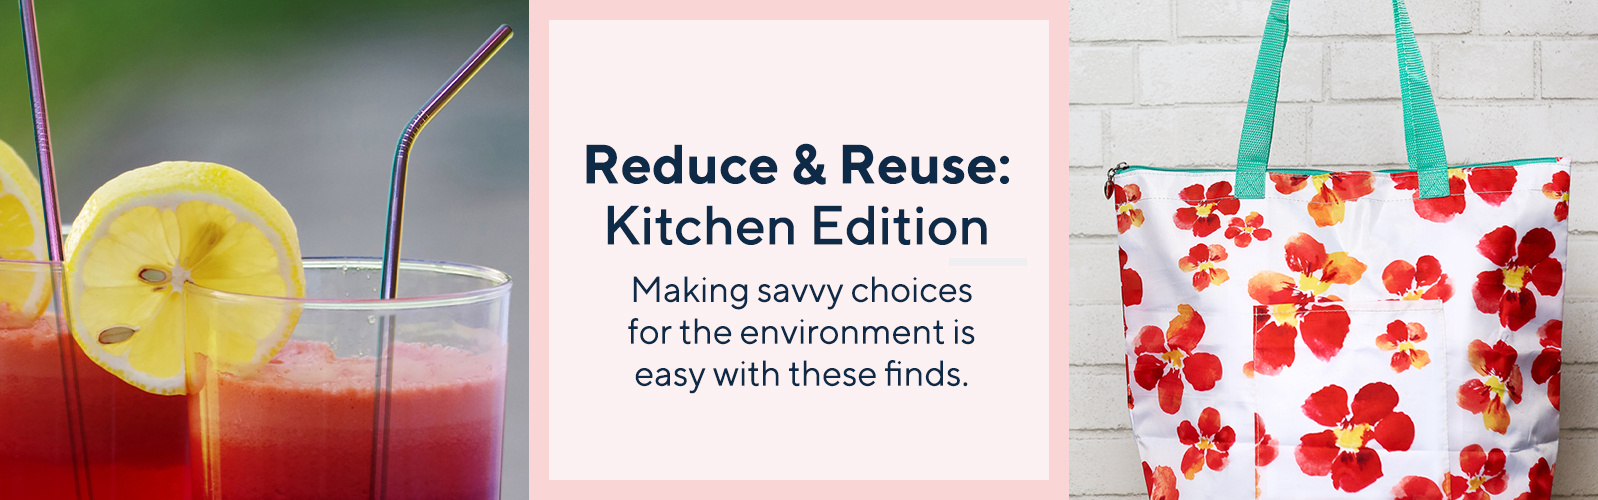 Reduce & Reuse: Kitchen Edition  Making savvy choices for the environment is easy with these finds. 